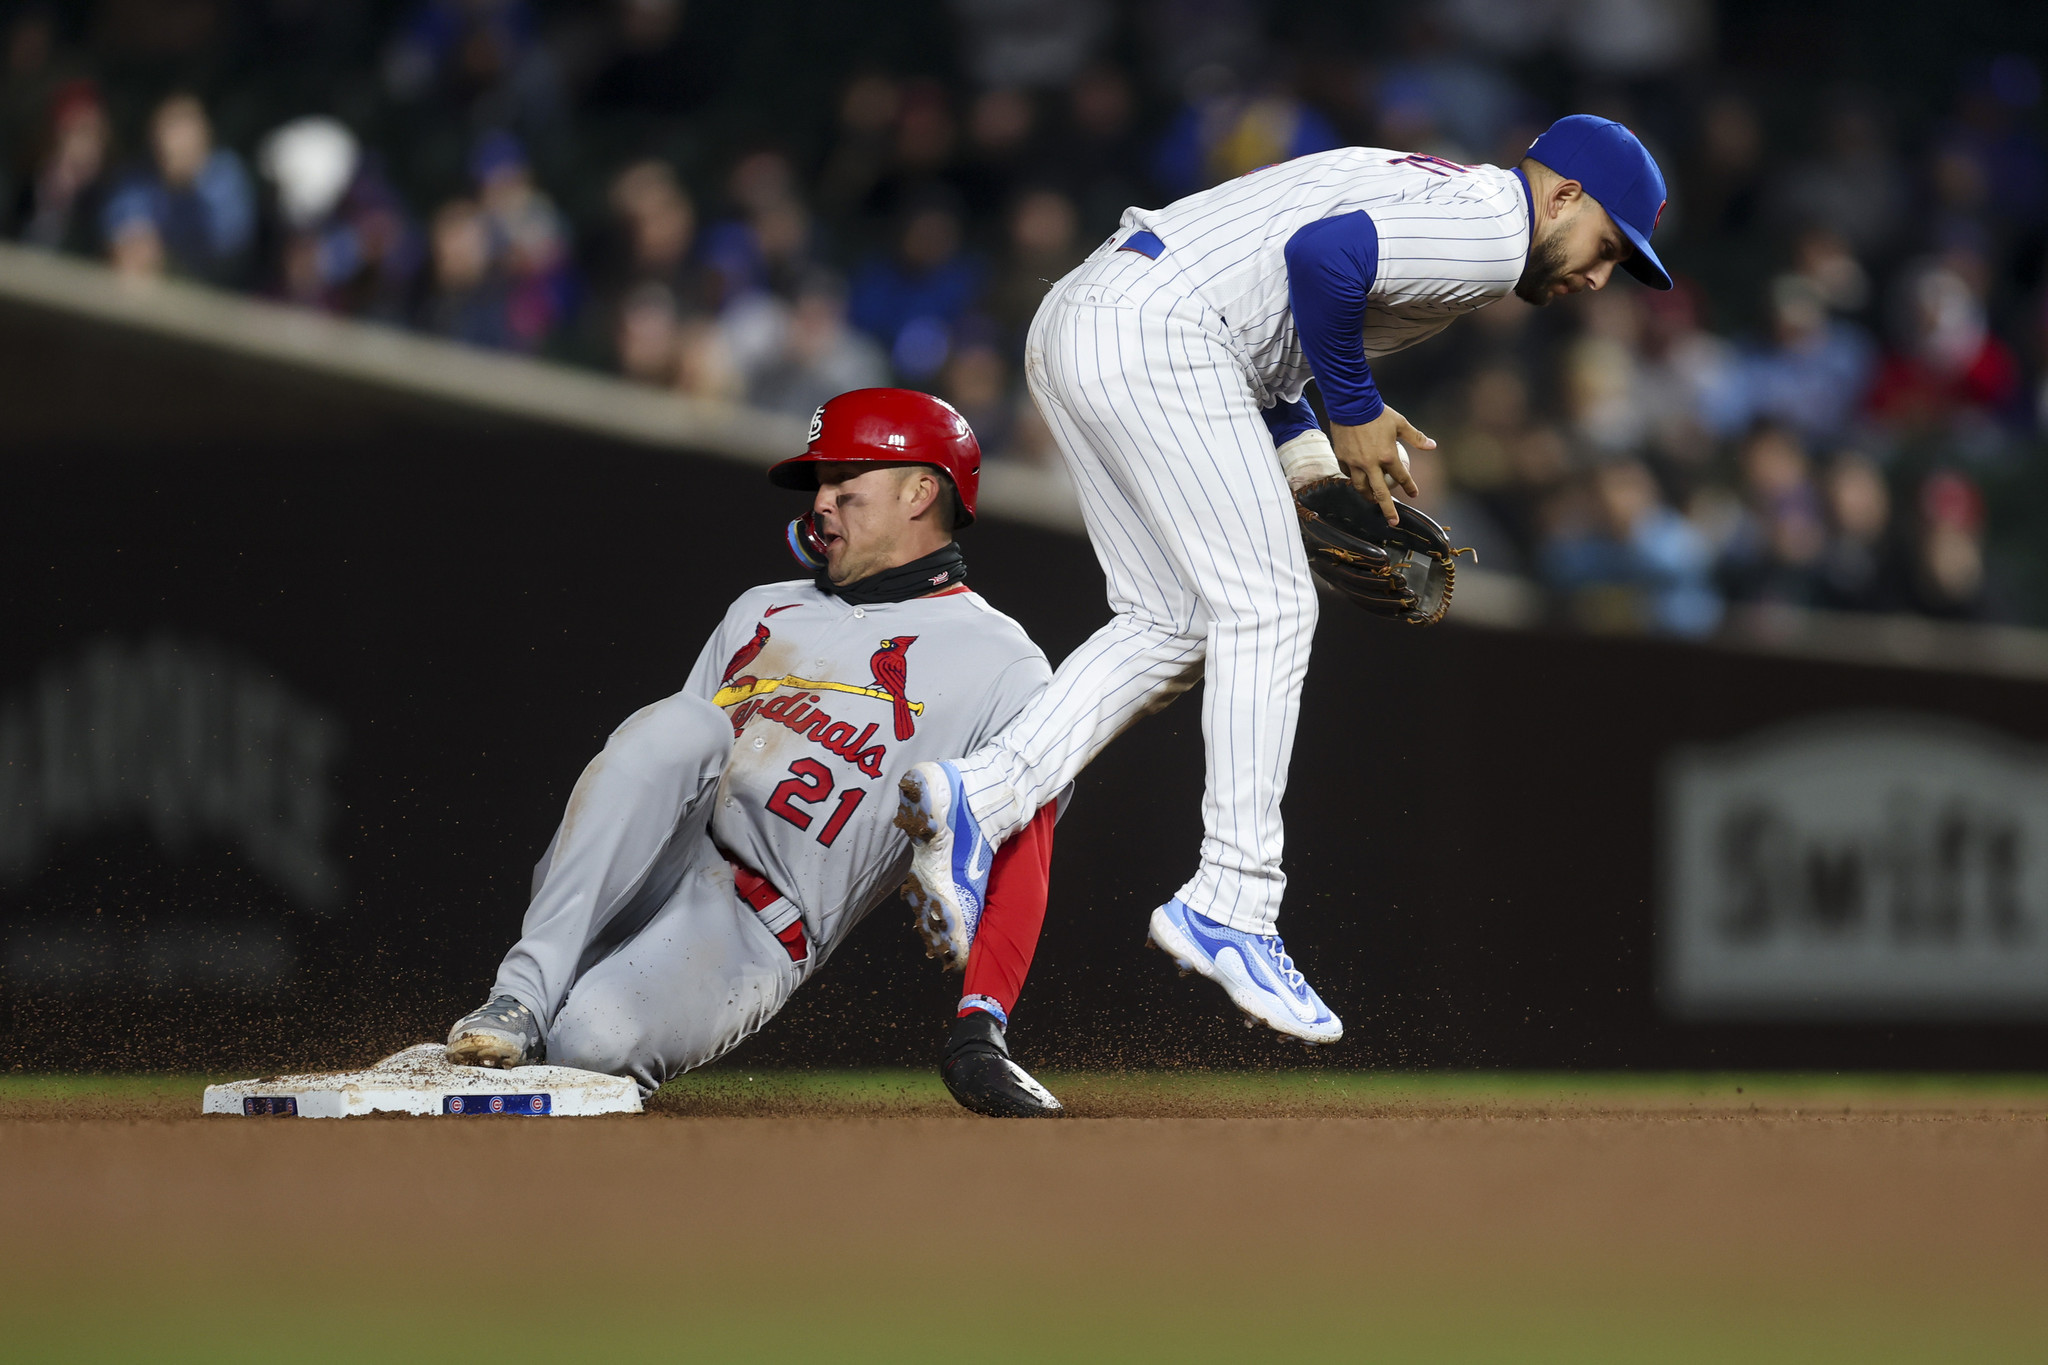 Contreras orchestrates heel turn as Cubs lose to St. Louis